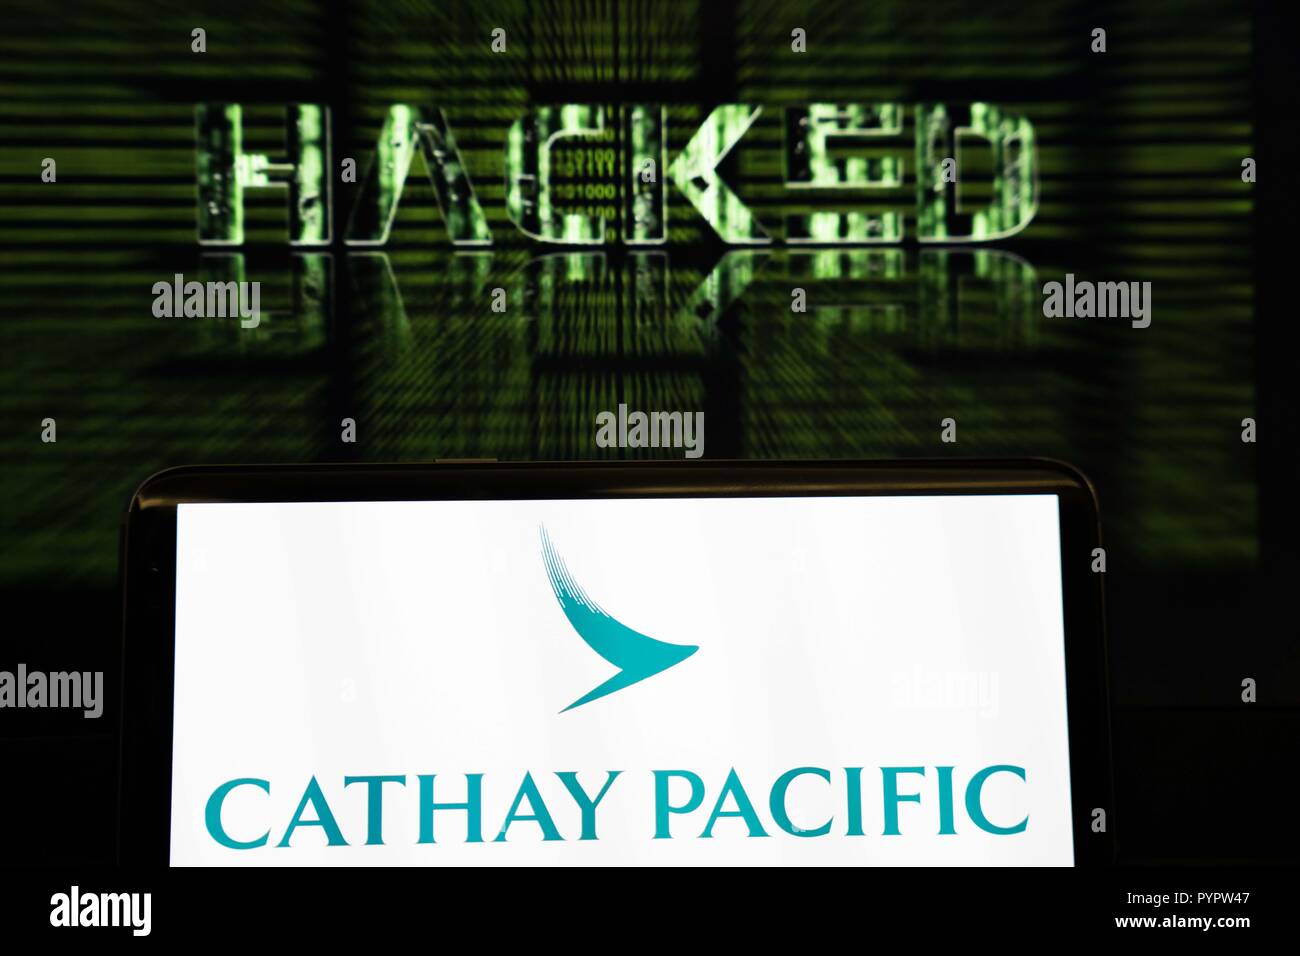 Cathay Pacific Logo displayed on a smartphone in front of a background which reads hacked. The Hong Kong based airline Cathay Pacific has reported that there has been a major data leak happened in march 2018 with data of around 9.4 million passengers was compromised during the breach, with 860,000 passport numbers, 245,000 Hong Kong identity card numbers, 403 expired credit card numbers and 27 credit card numbers without CVV being accessed. Stock Photo